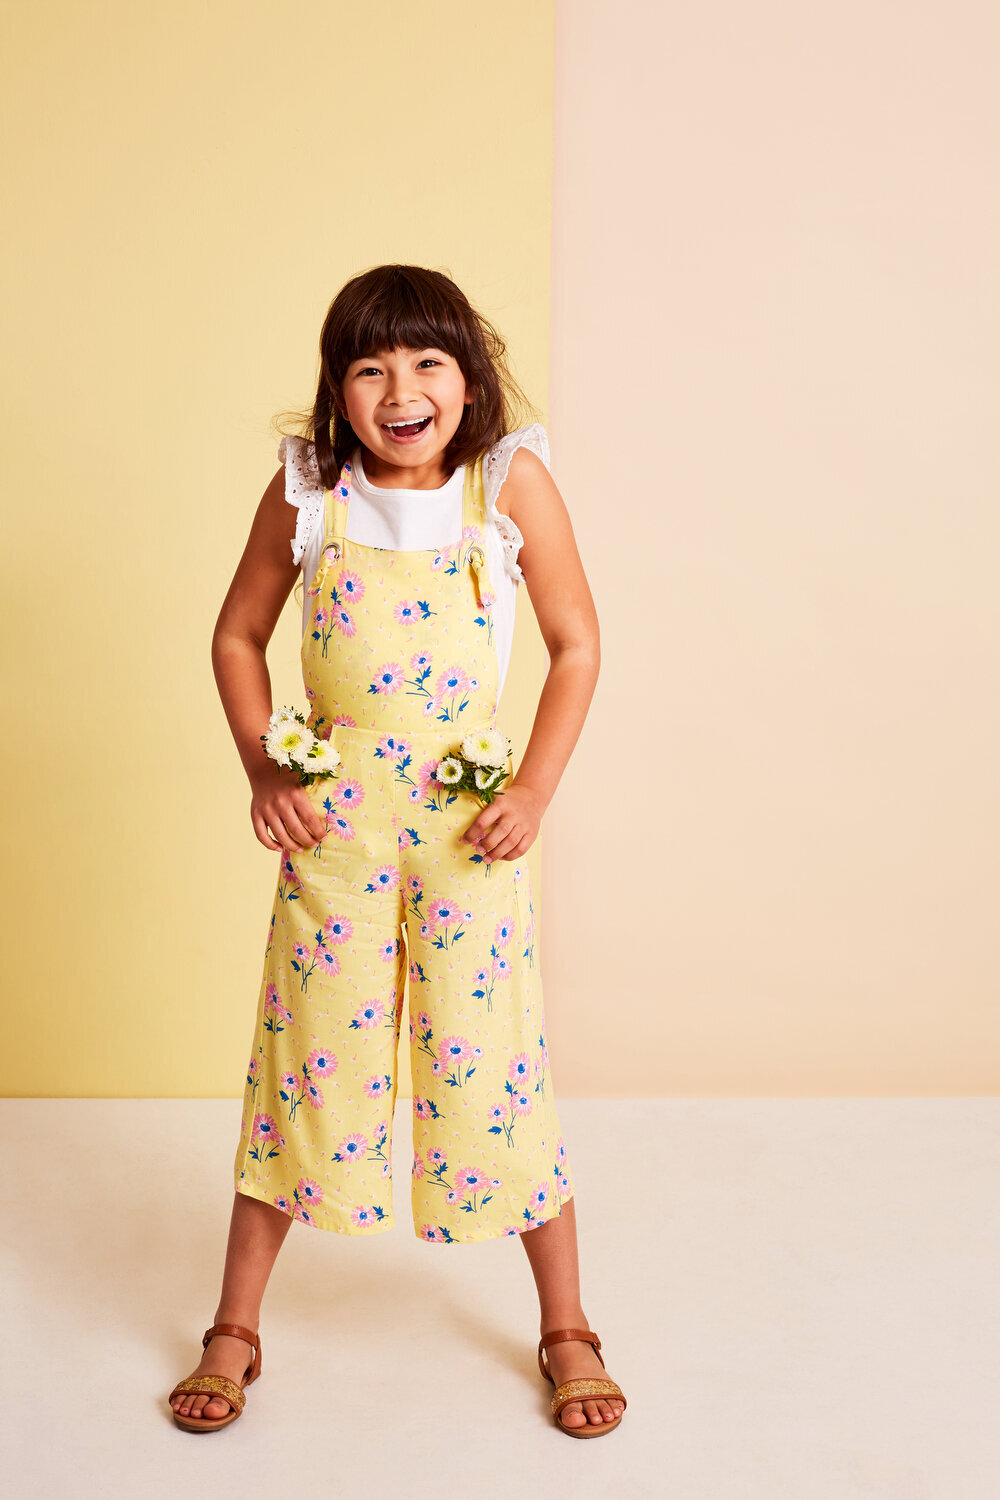 Greer Rivera Photography Kids Editorial Photoshoots Marin CA Girl in flower overalls smiling